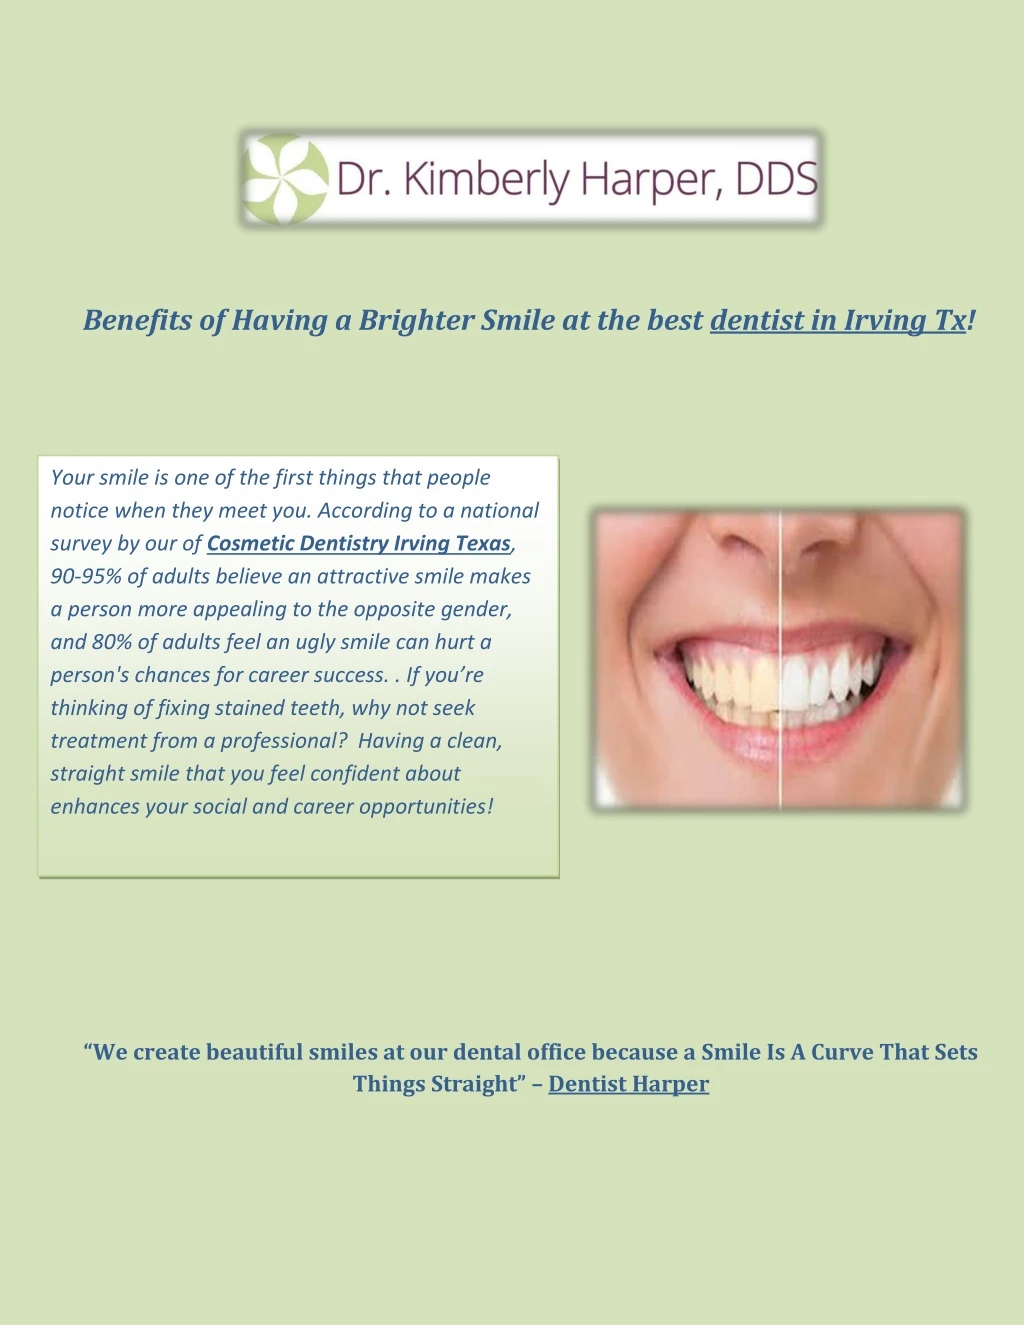 benefits of having a brighter smile at the best